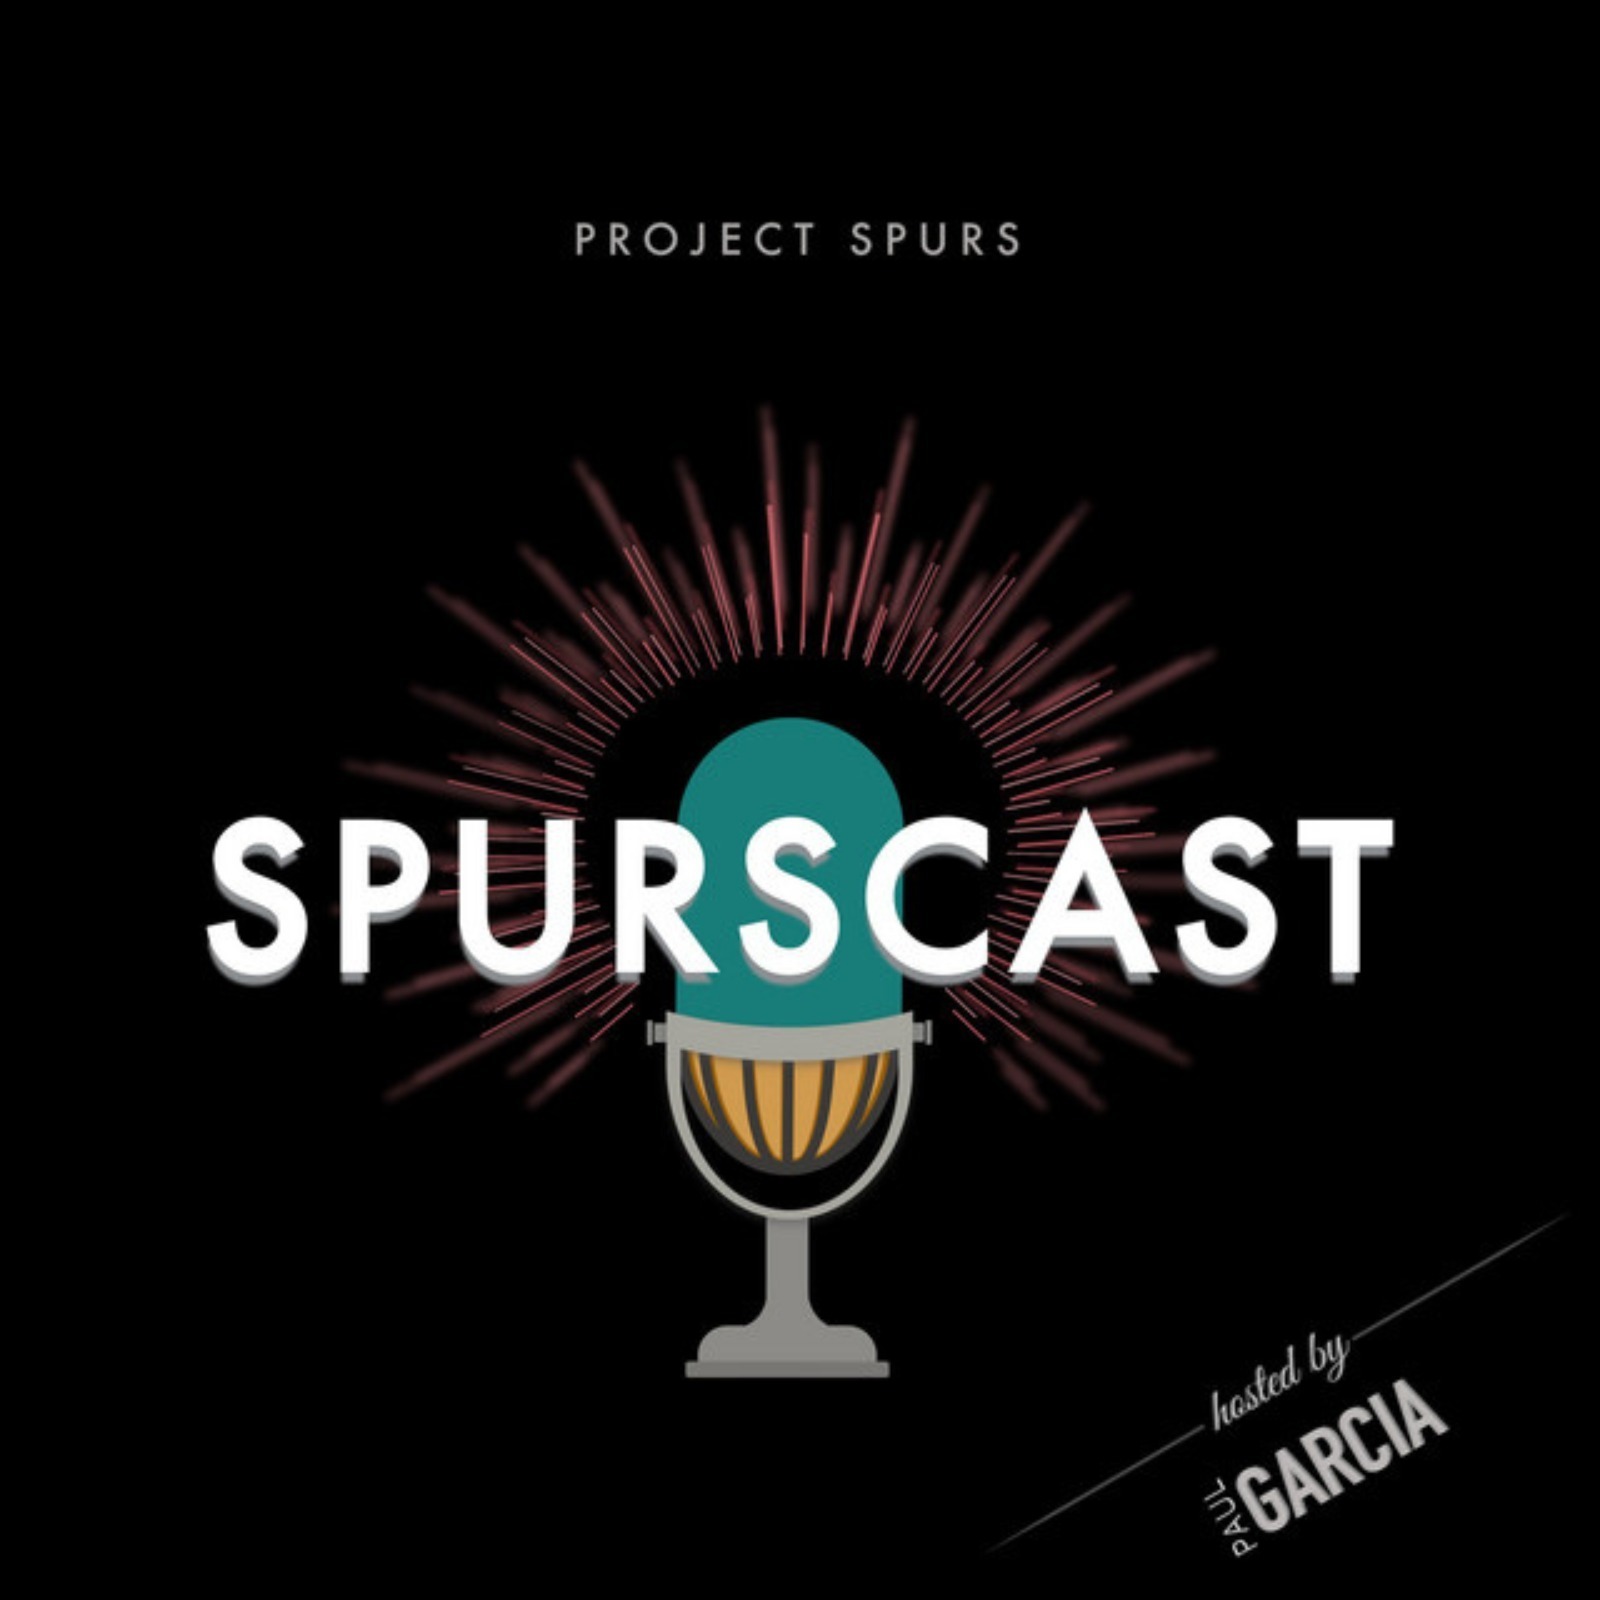 Spurscast Ep. 720: Deep Dive on the Spurs and the Three Point Line